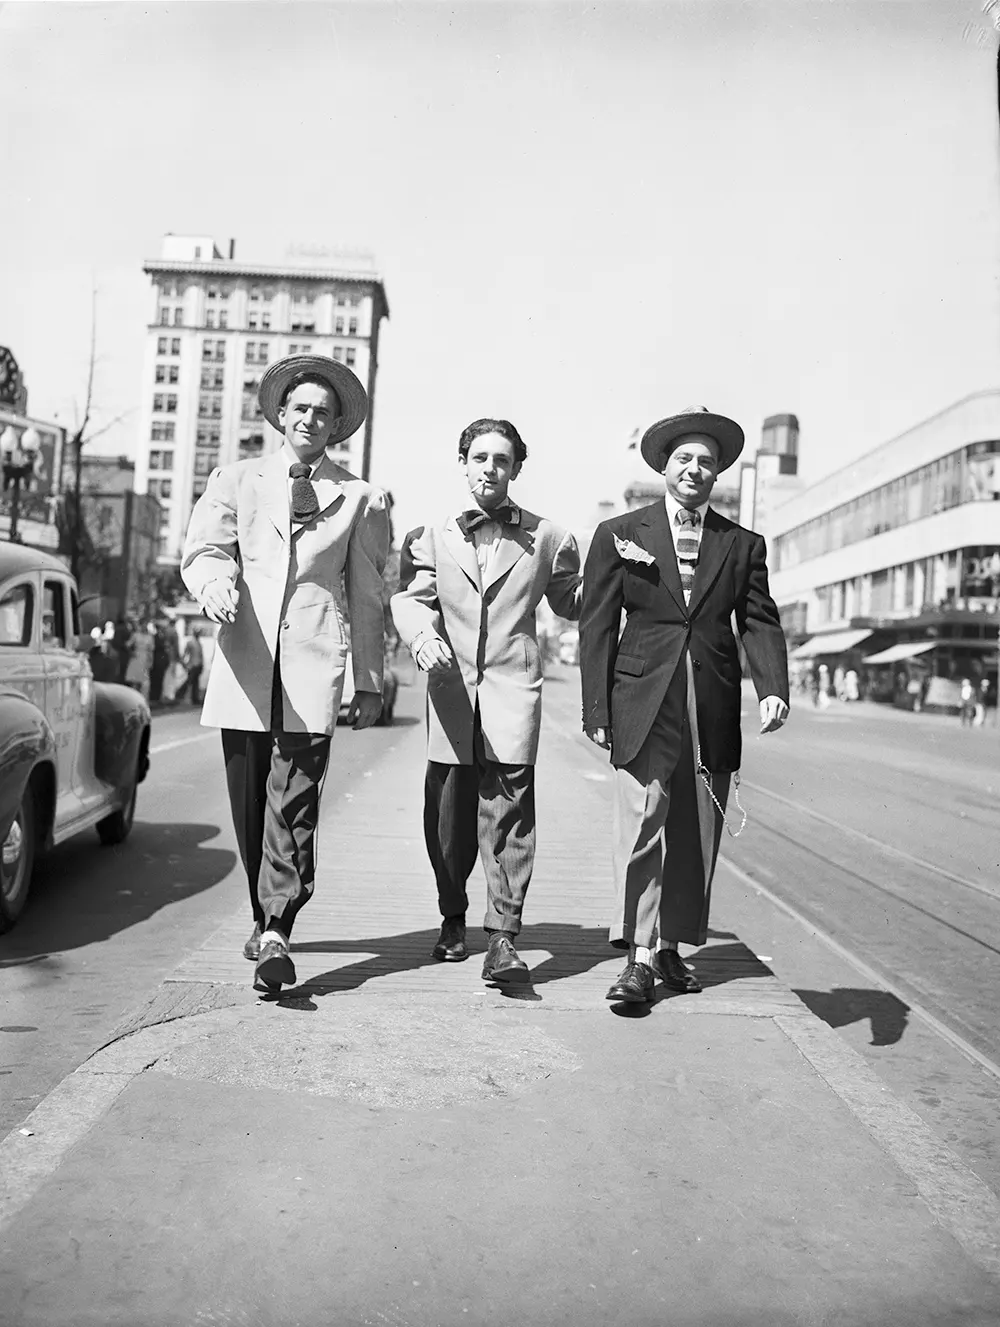 zoot suit old photos